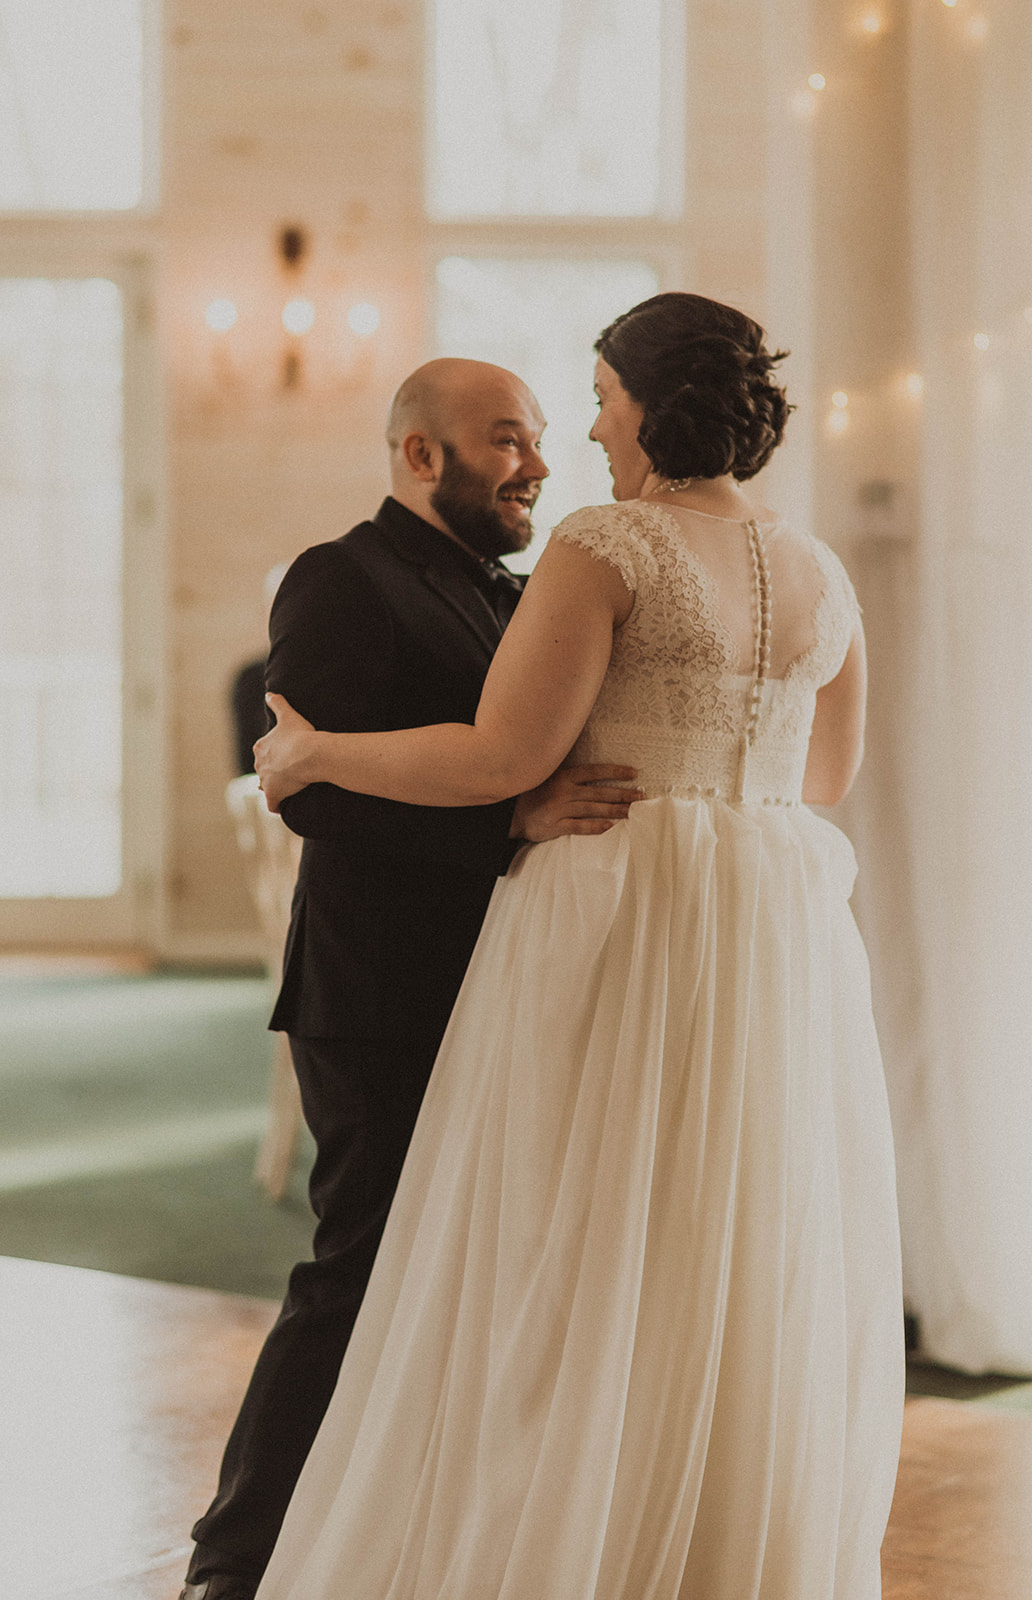 Bride and groom share their first dance together during their dreamy upstate New York wedding